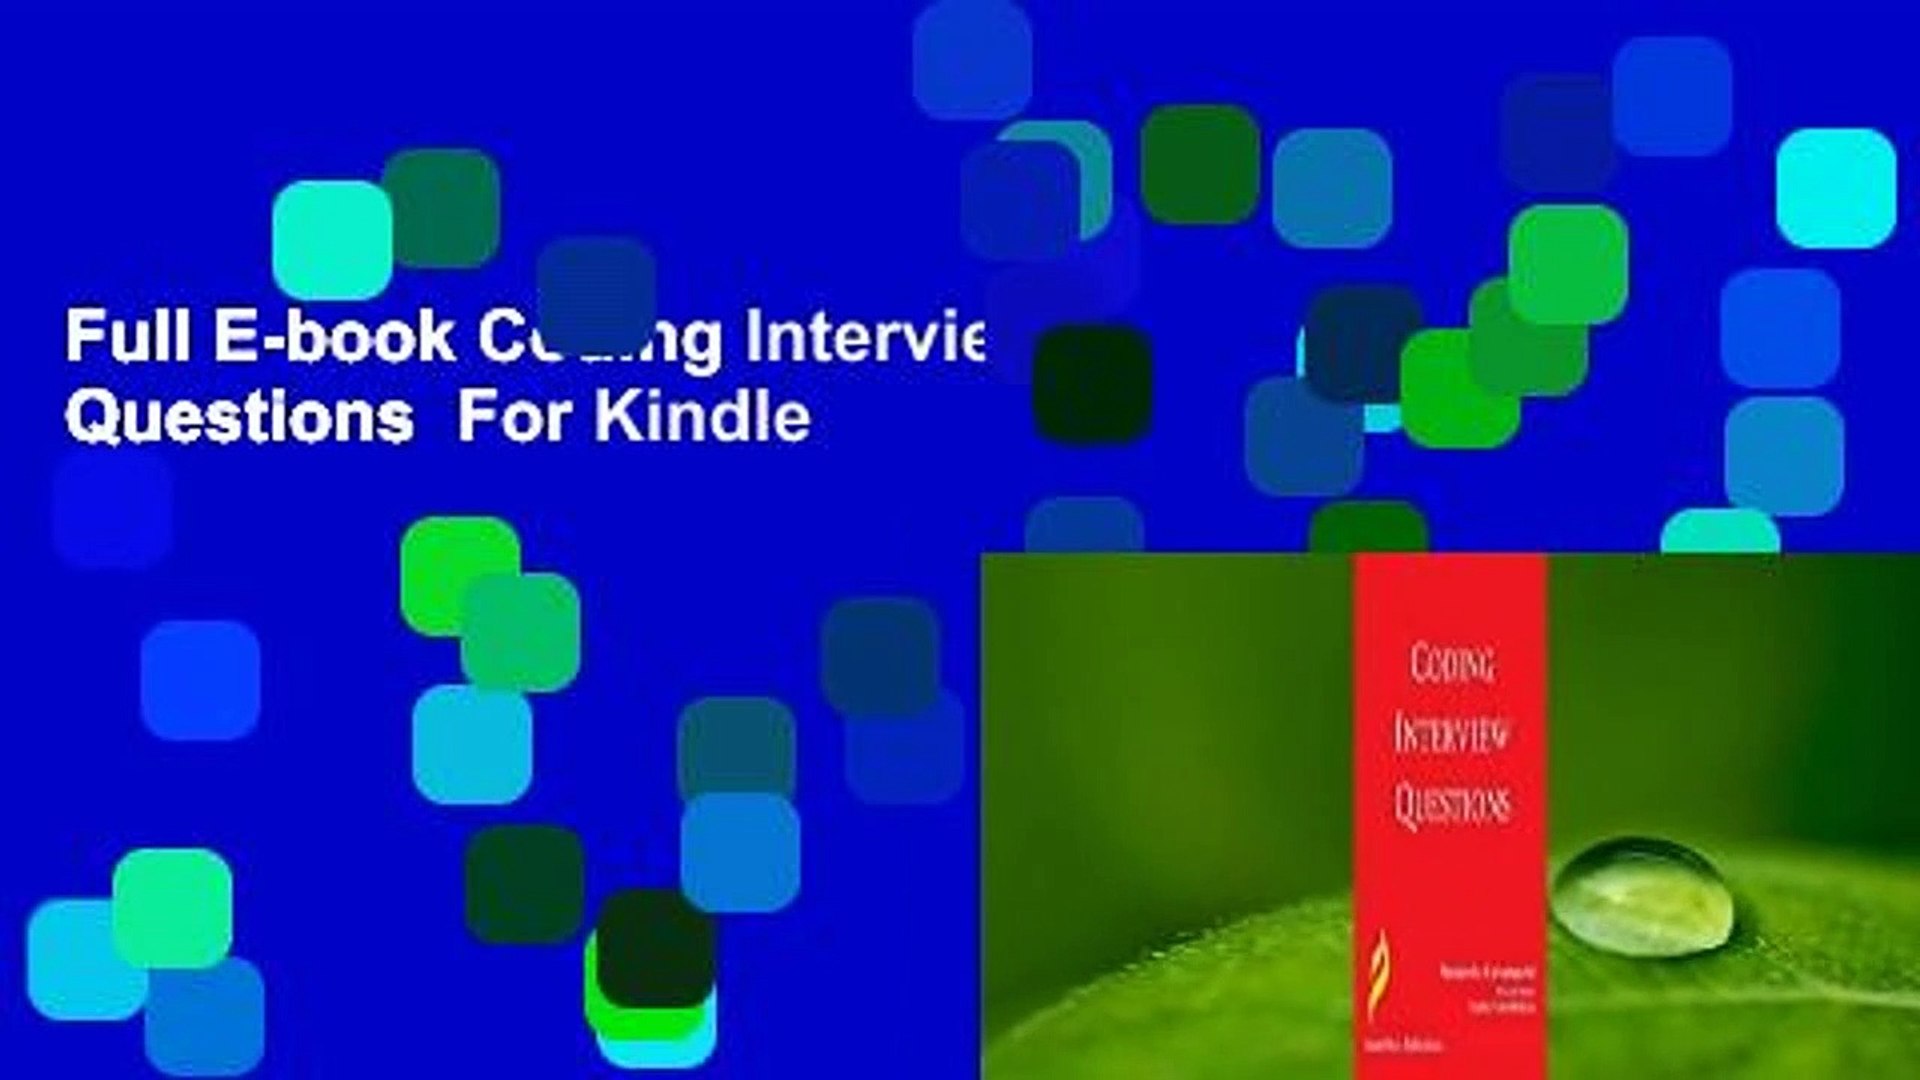 Full E-book Coding Interview Questions  For Kindle